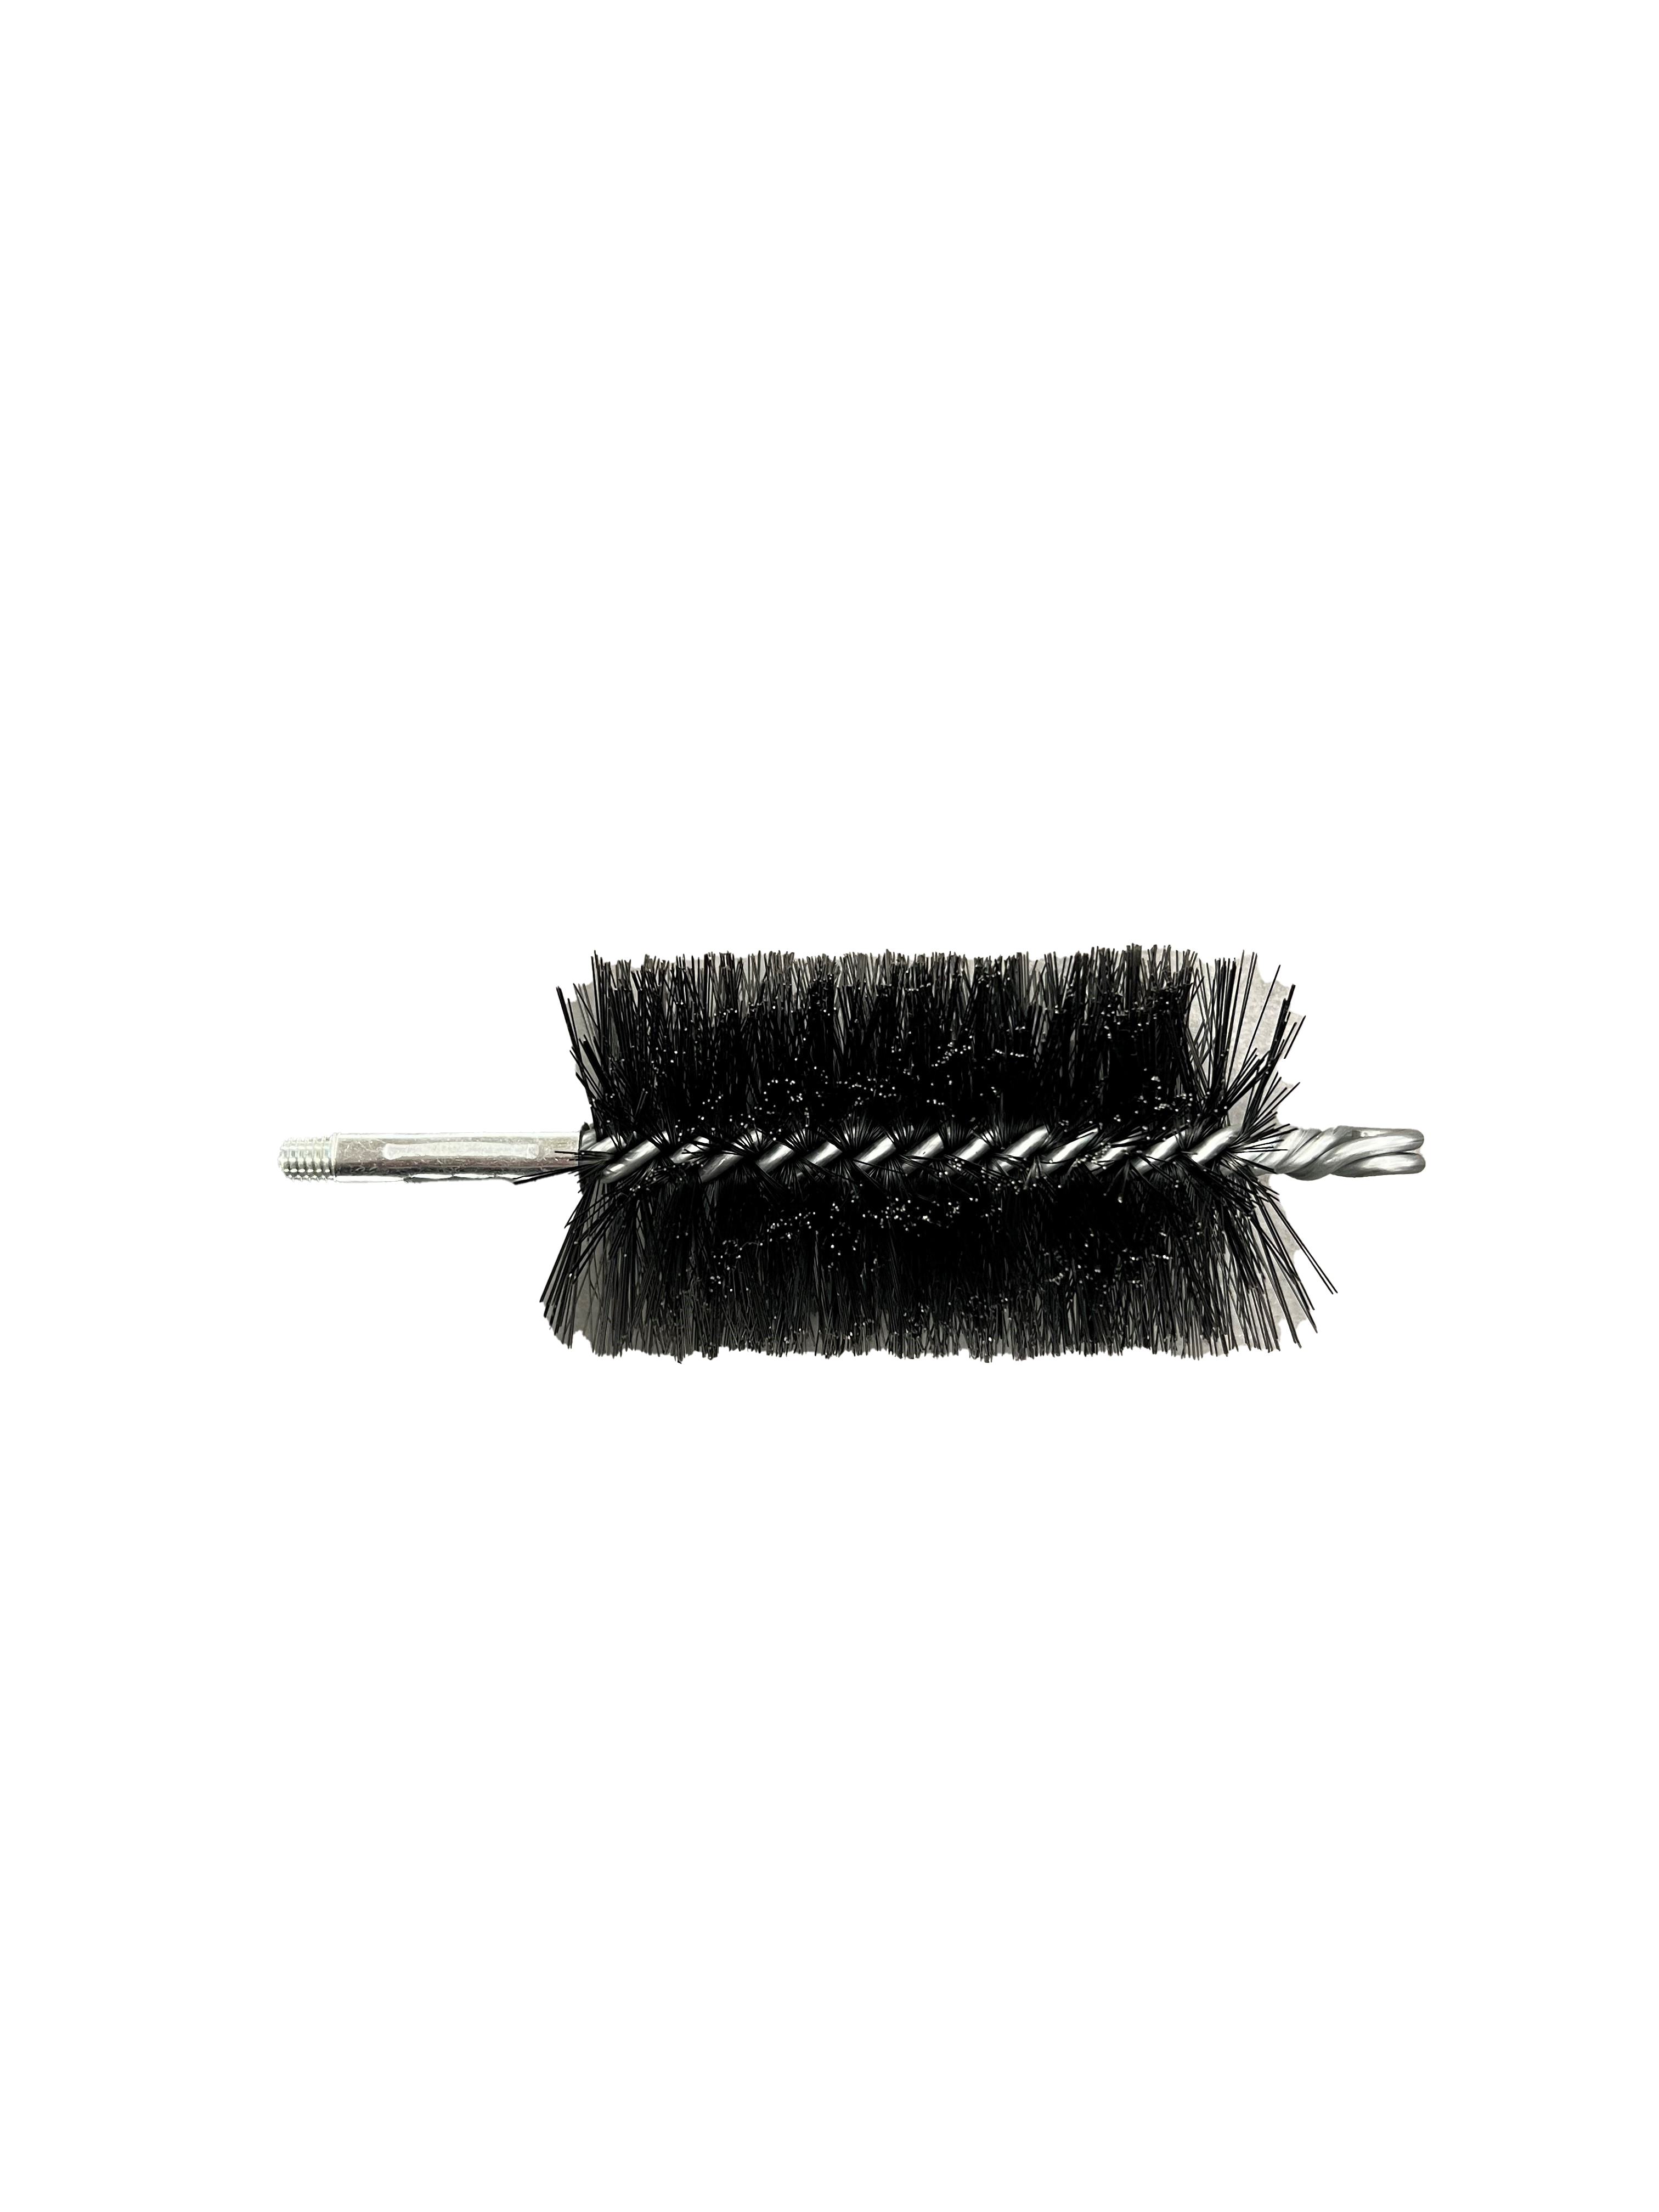 KlWY/SkuImages/e5ff10a7-b075-4541-a0b8-973b21dc7bd9/round-brush-head.png